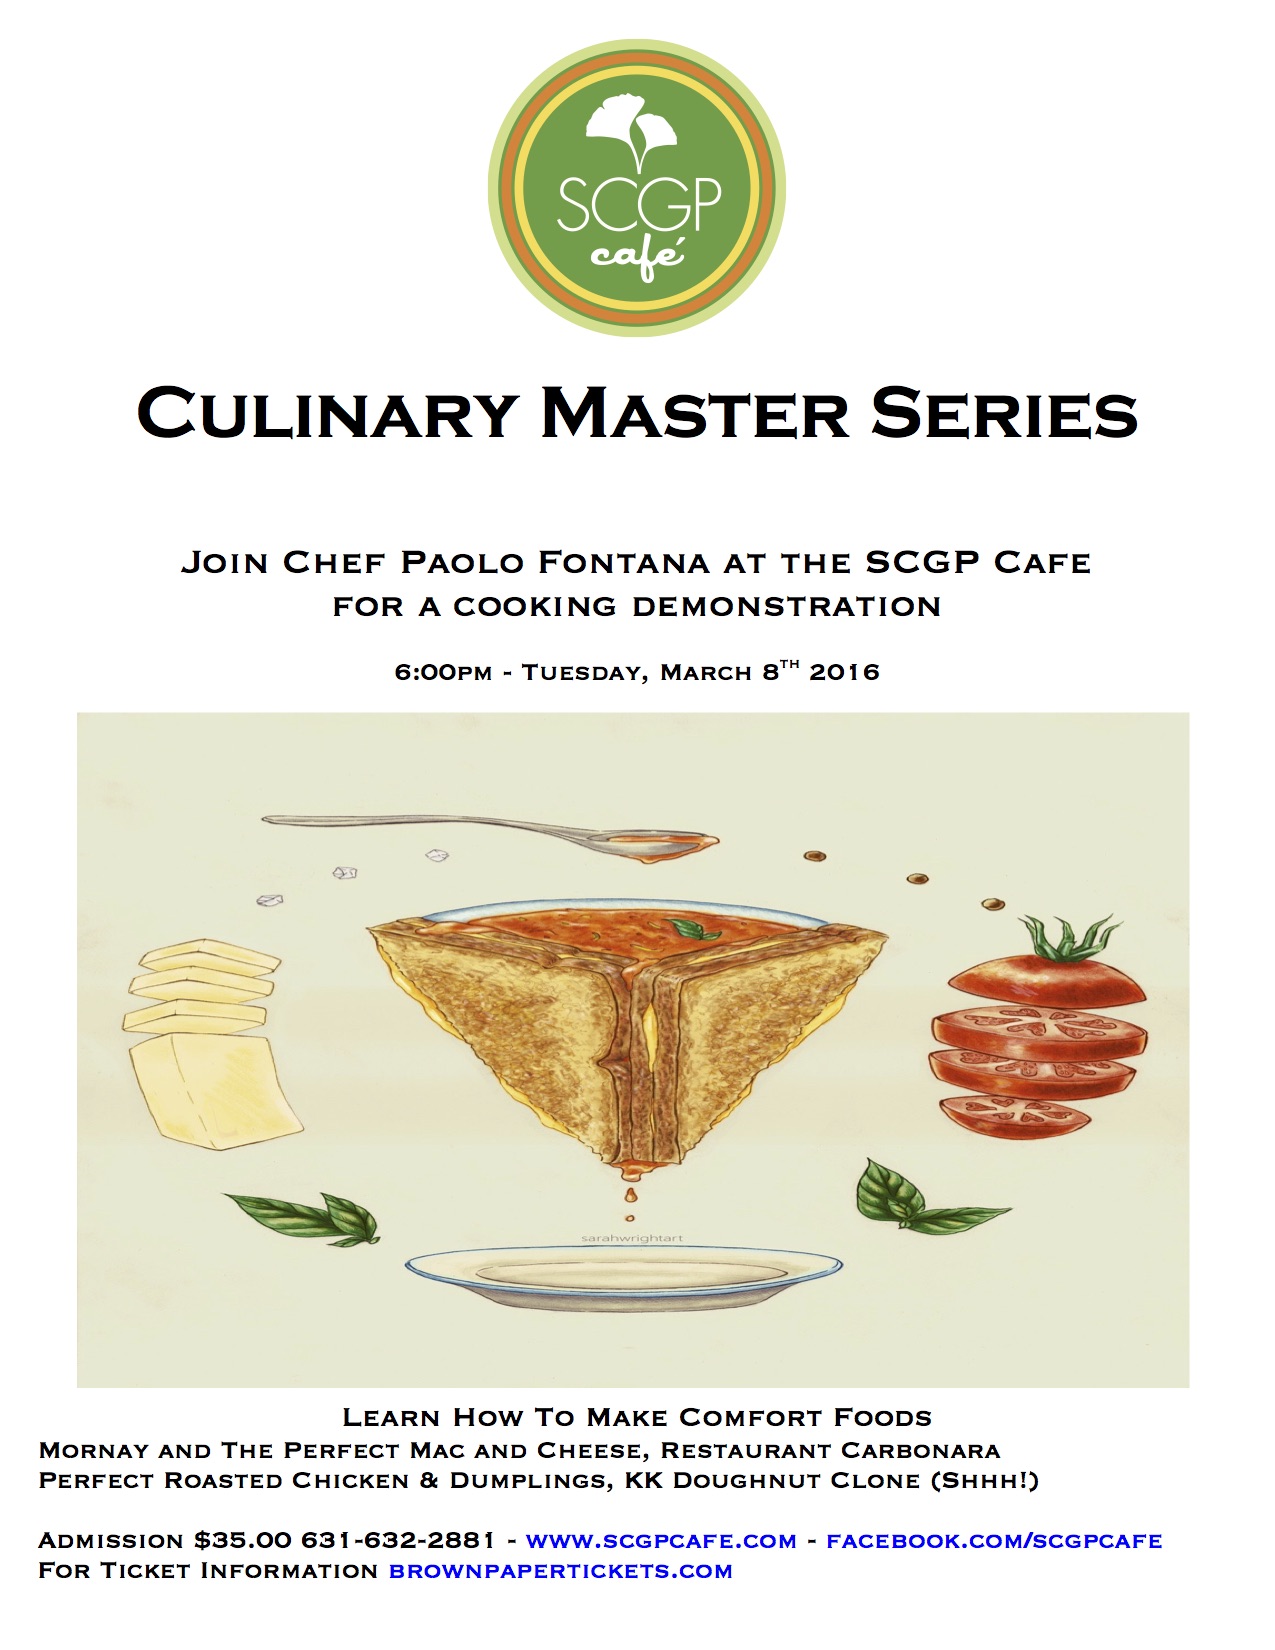 Culinary Master Series Comfort Foods 3.8.16 V1